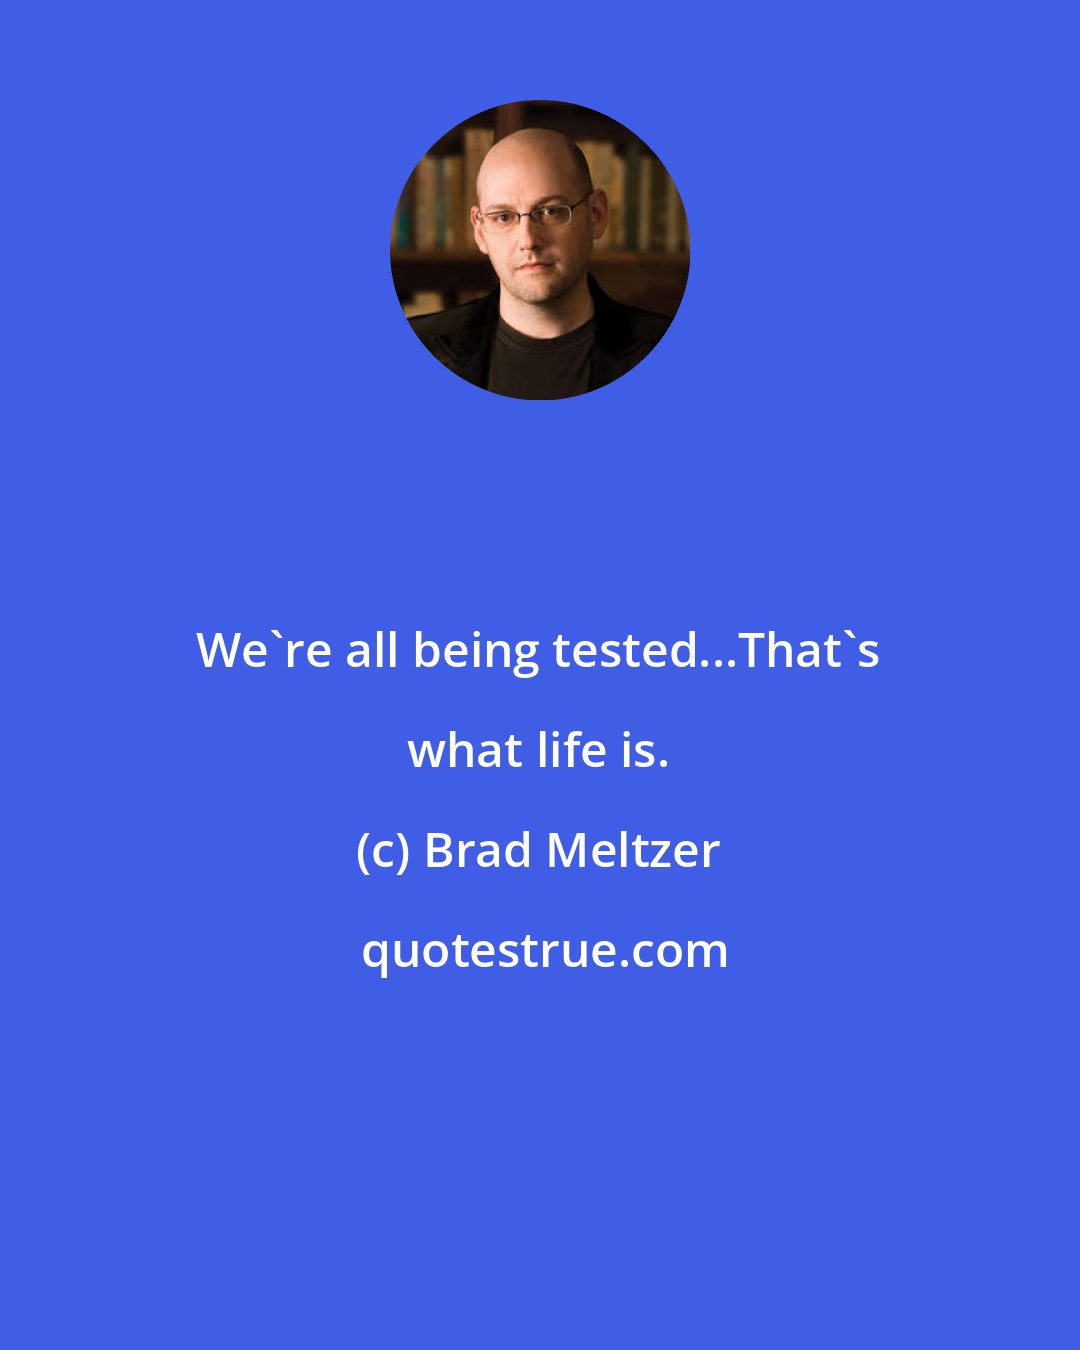 Brad Meltzer: We're all being tested...That's what life is.